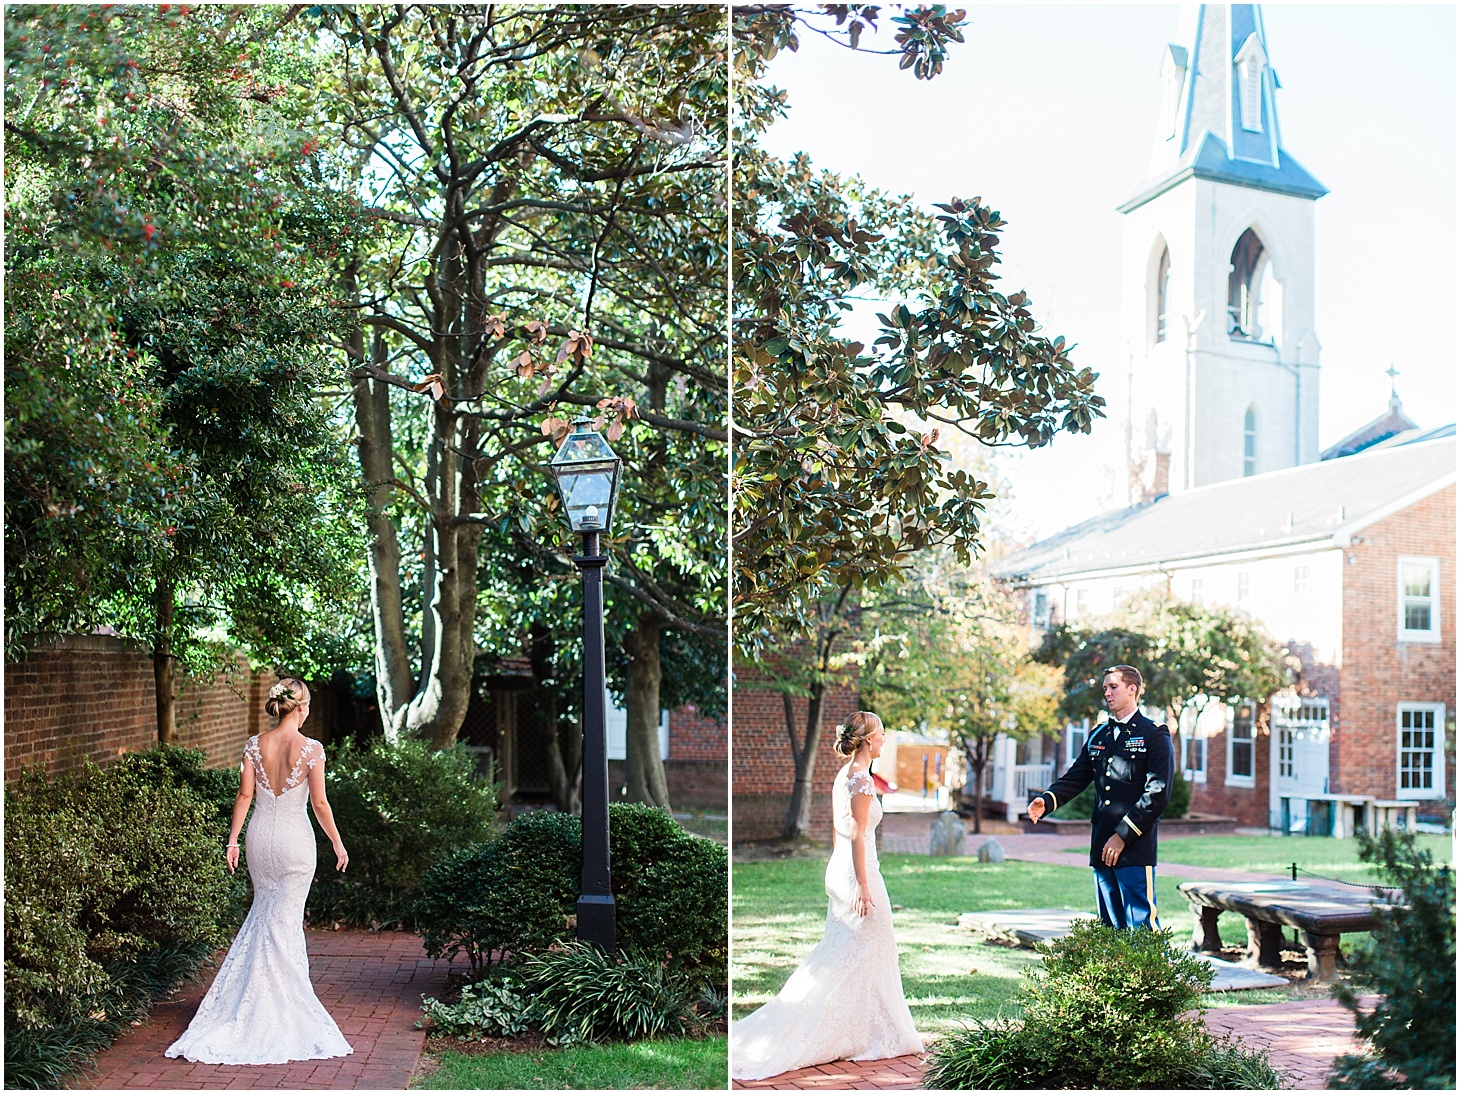 First Look before Wedding Ceremony at Old Presbyterian Meeting House | Southern Black Tie wedding at St. Regis DC in Dusty Blue and Ivory | Sarah Bradshaw Photography